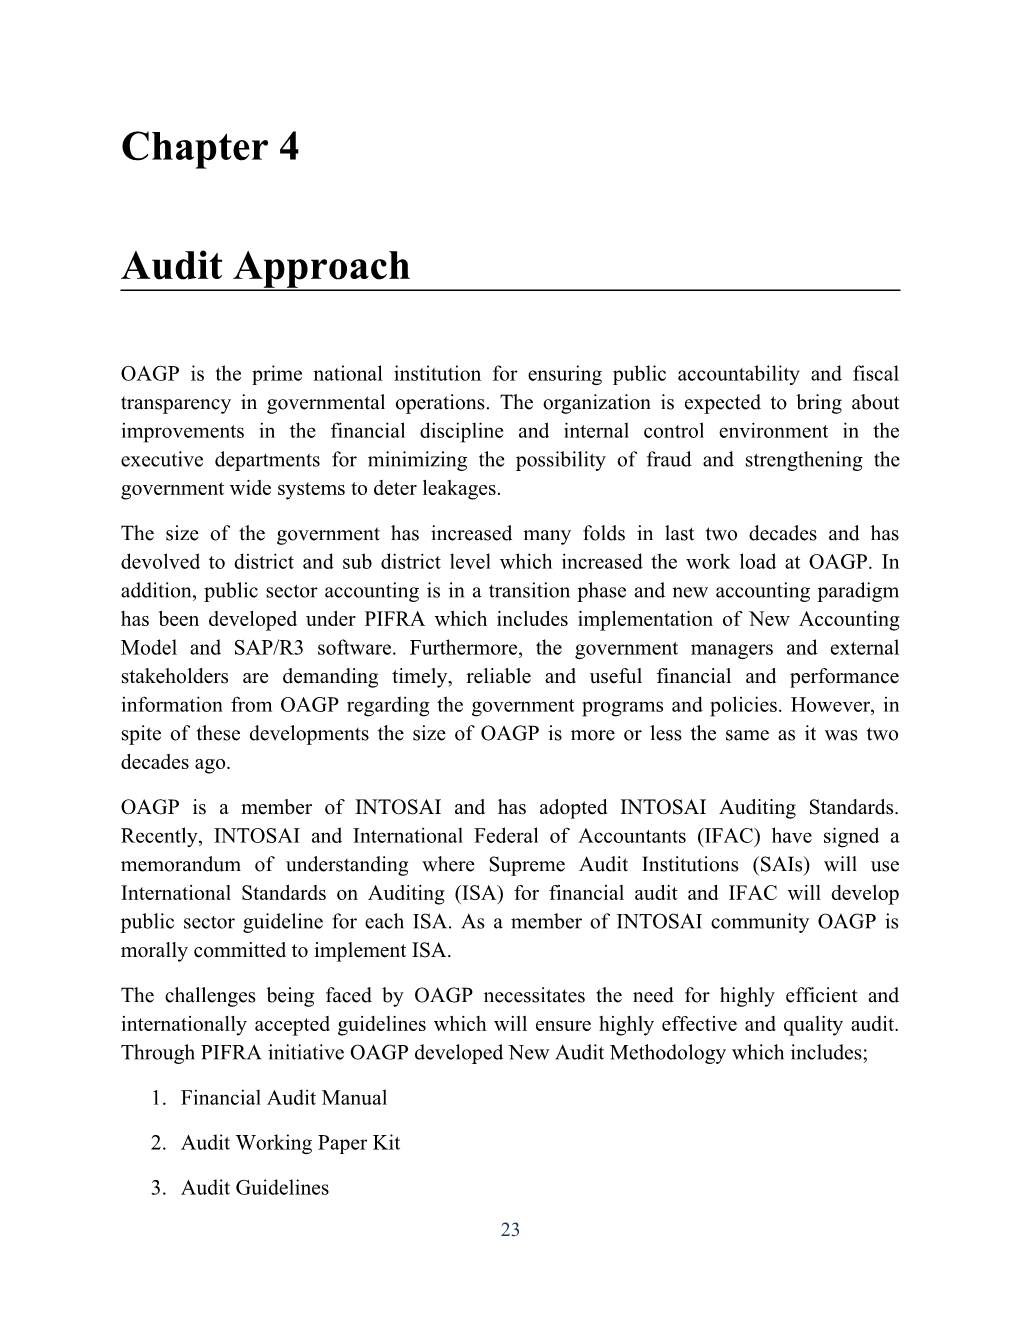 Chapter 4: Audit Approach